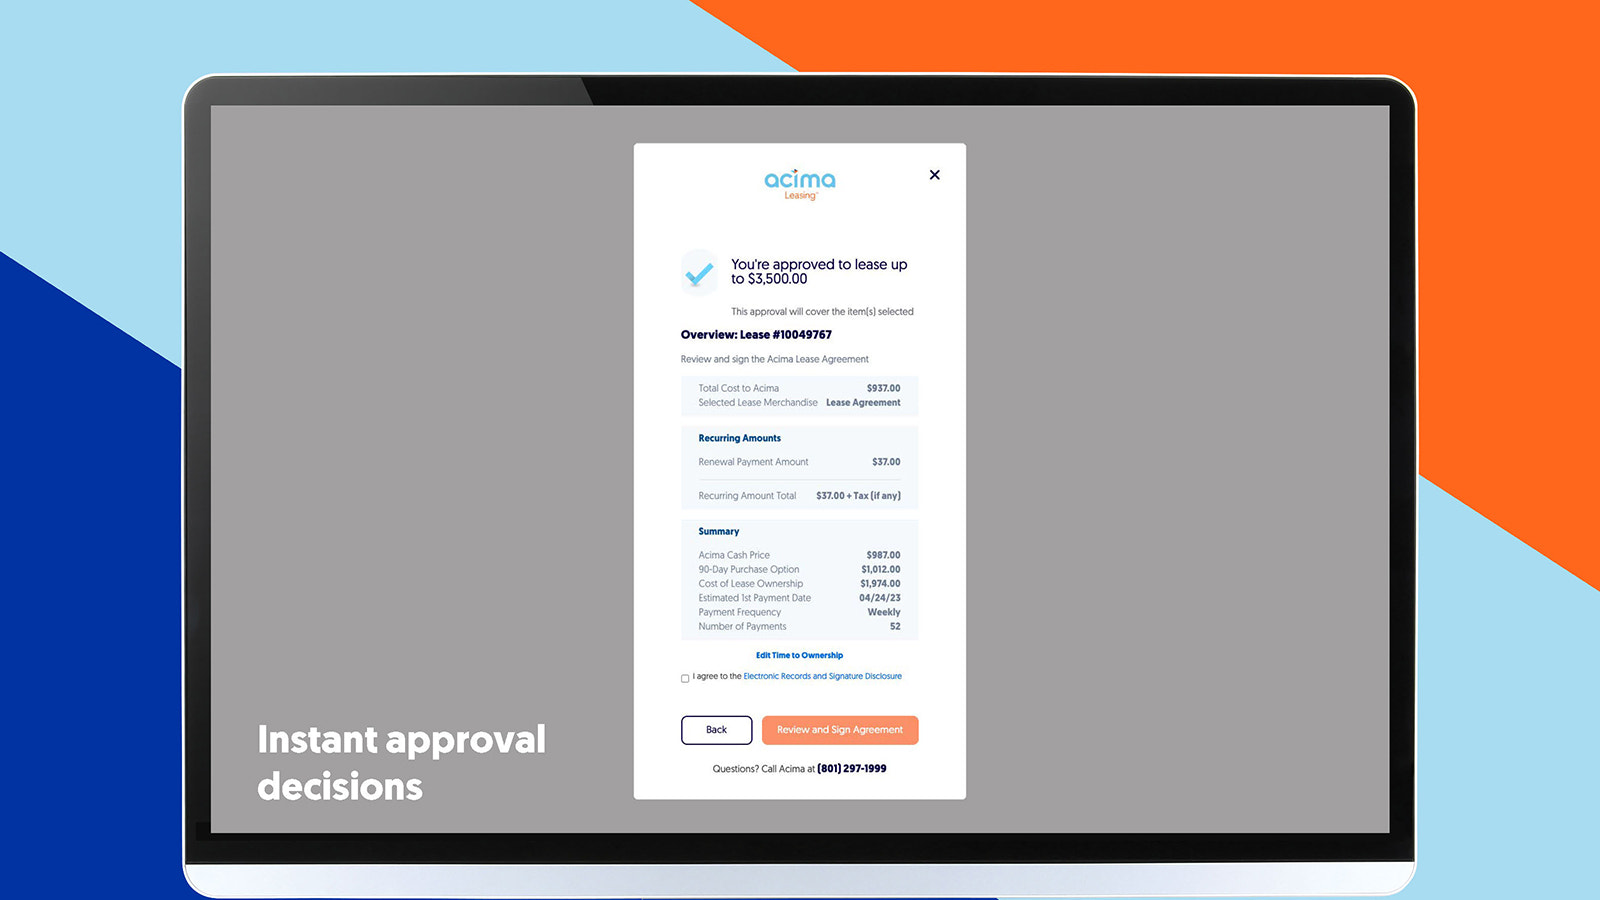 Instant approval decisions